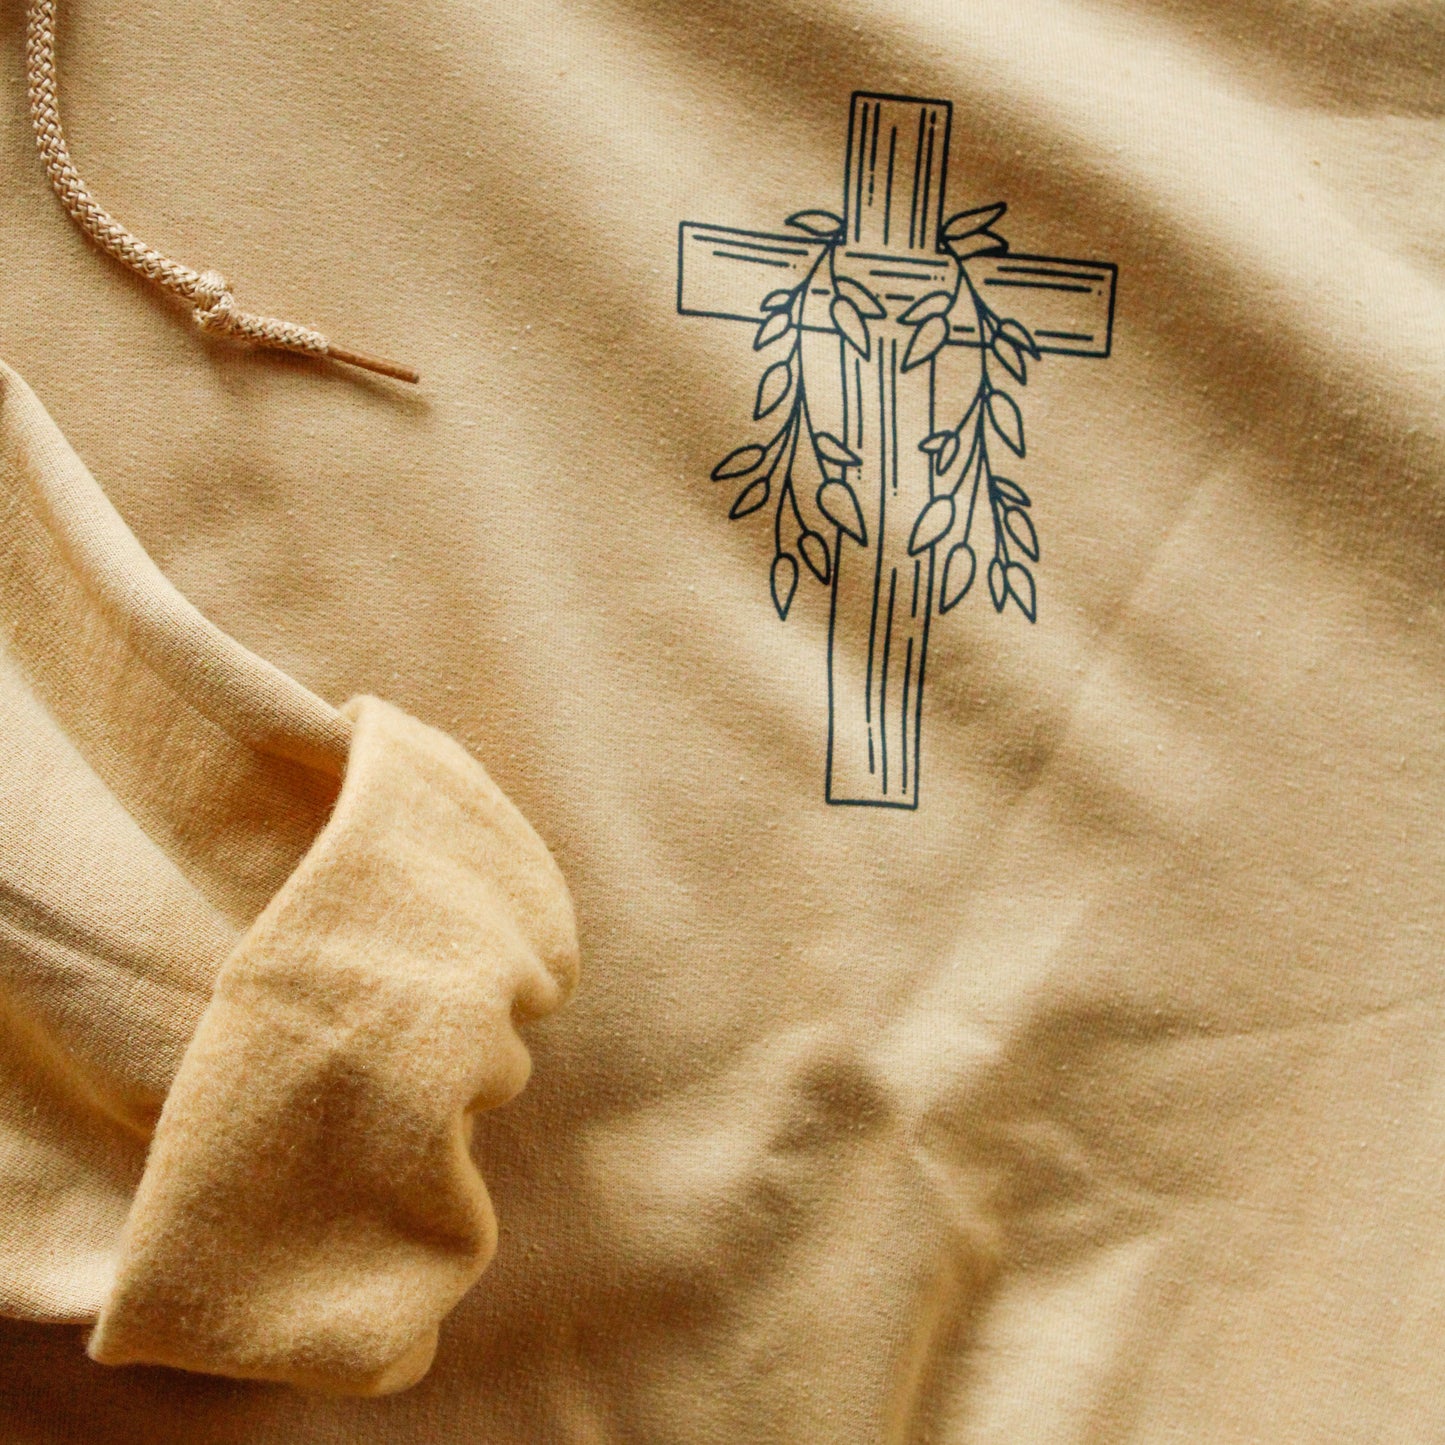 Abide in Me Hooded Sweatshirt with Pocket (Color: Old Gold)